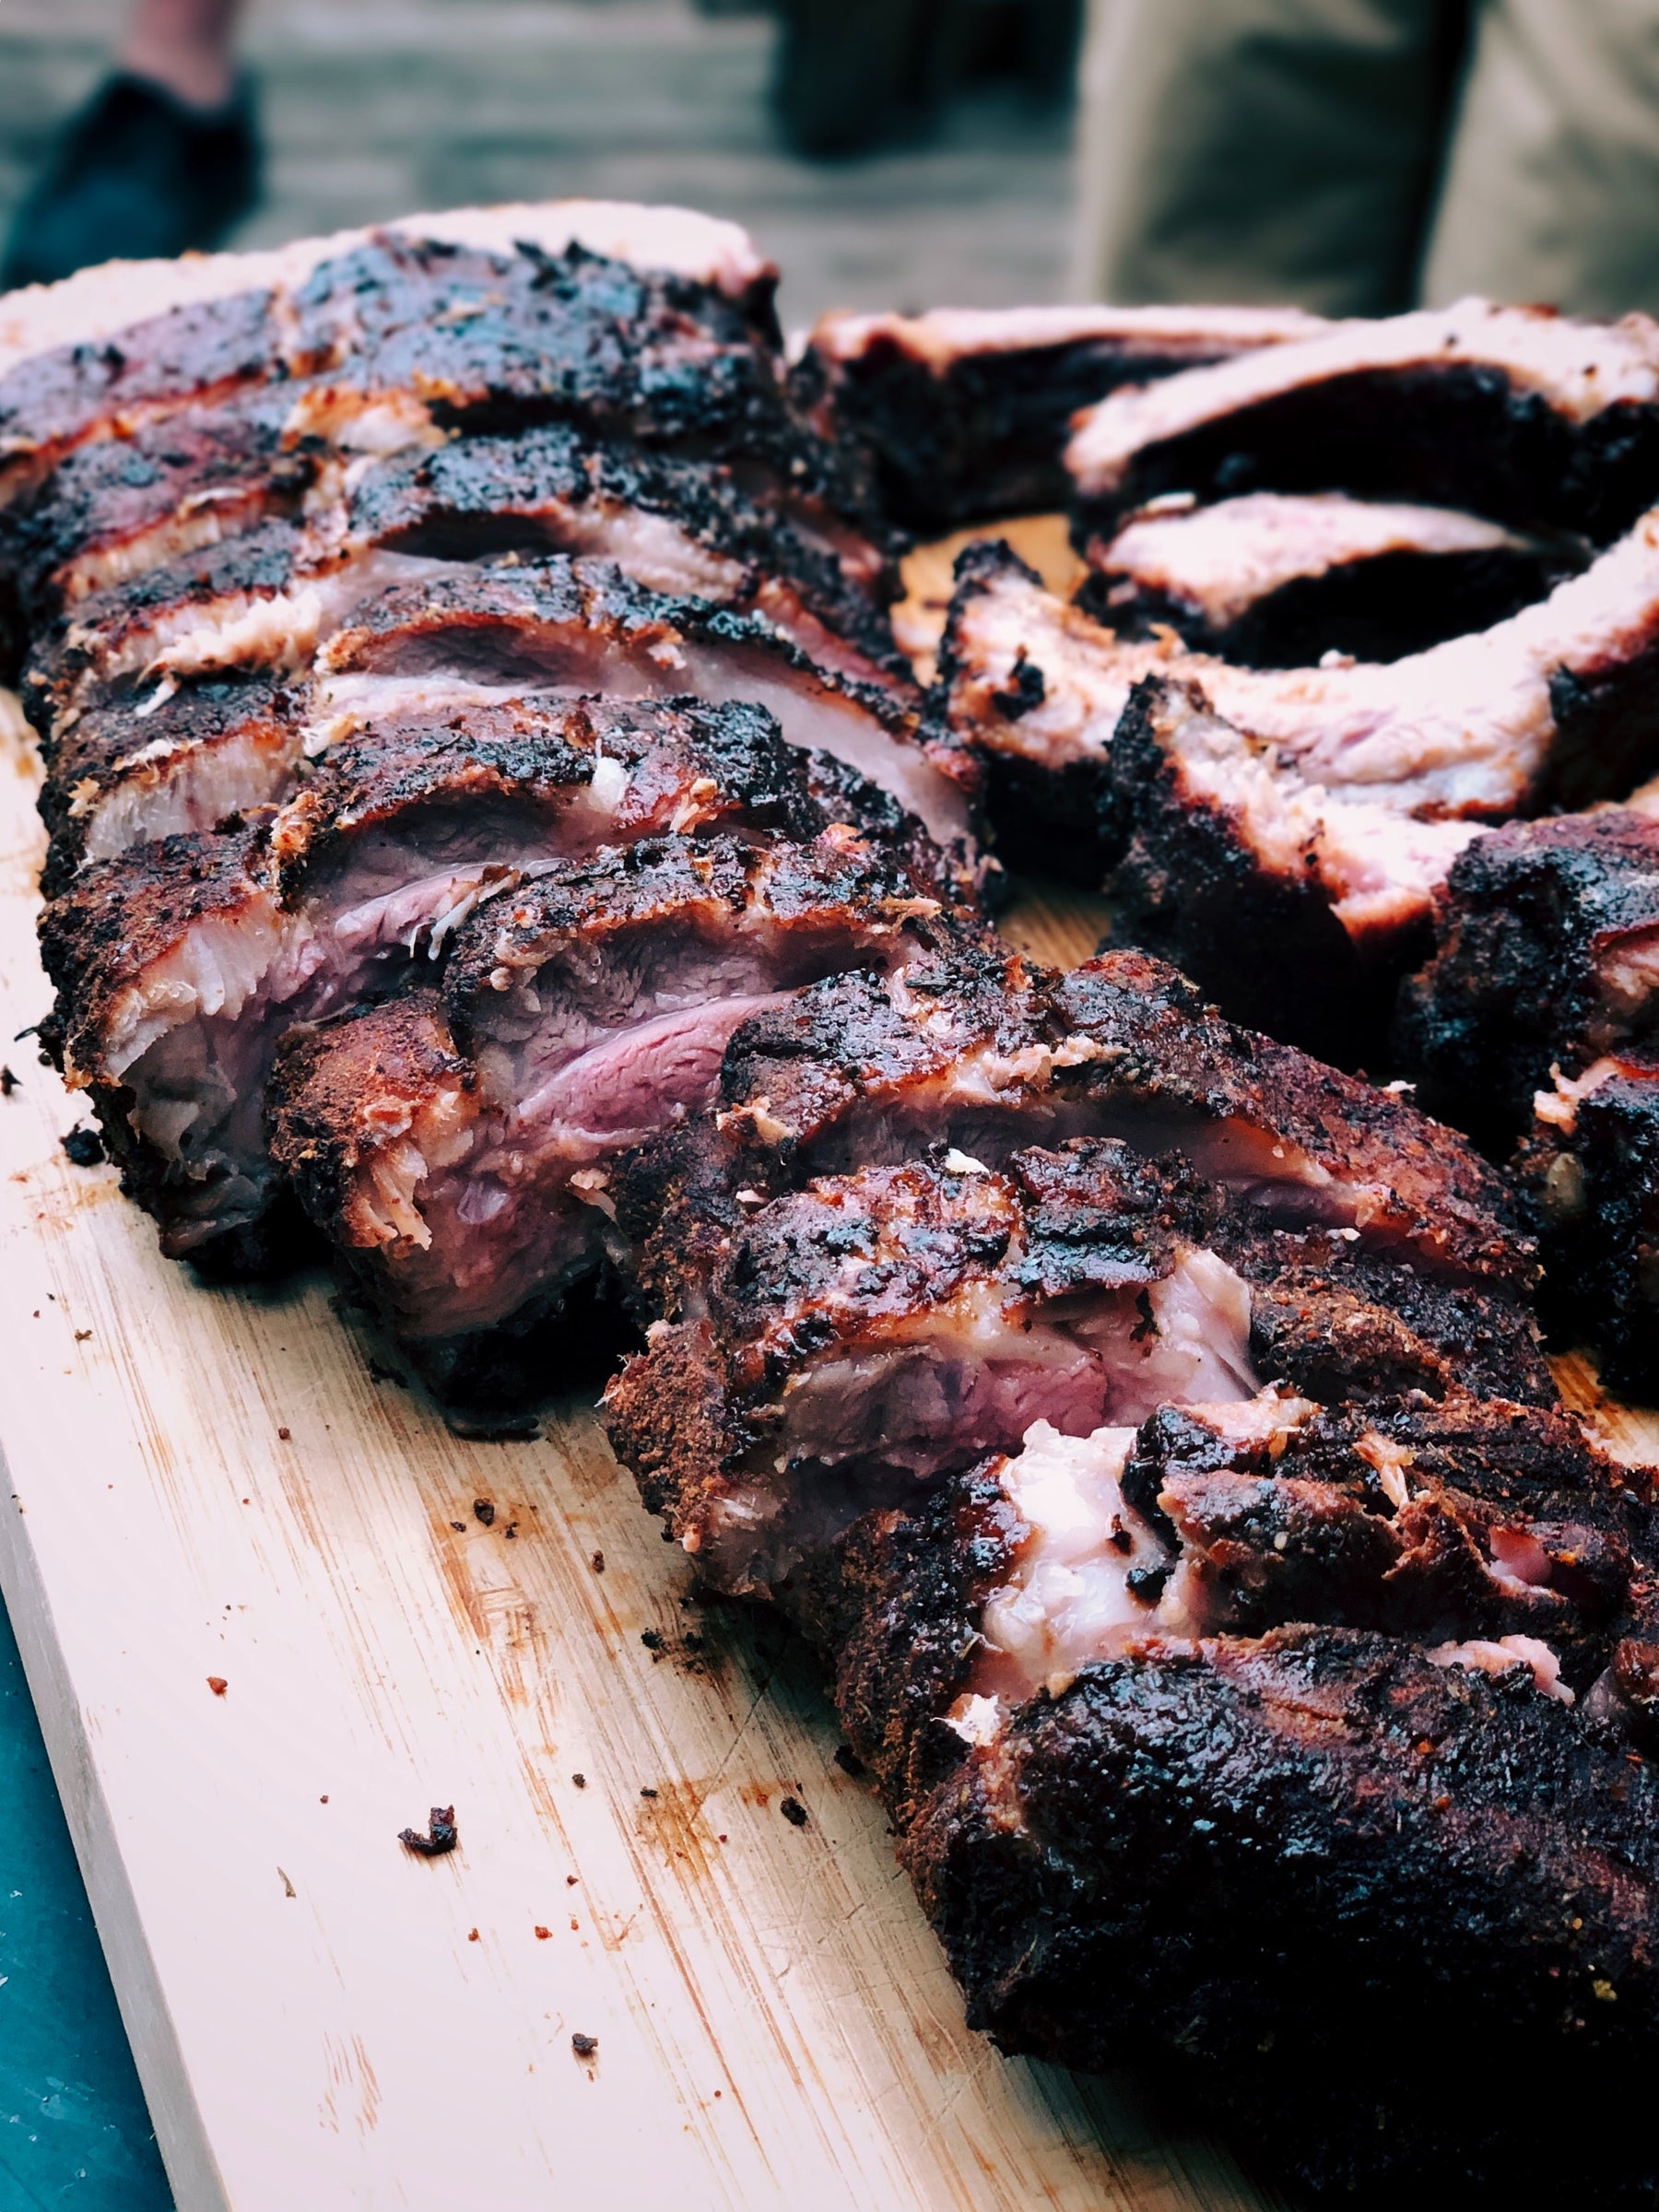 5 Methods to Cook Ribs Faster Without Sacrificing Quality